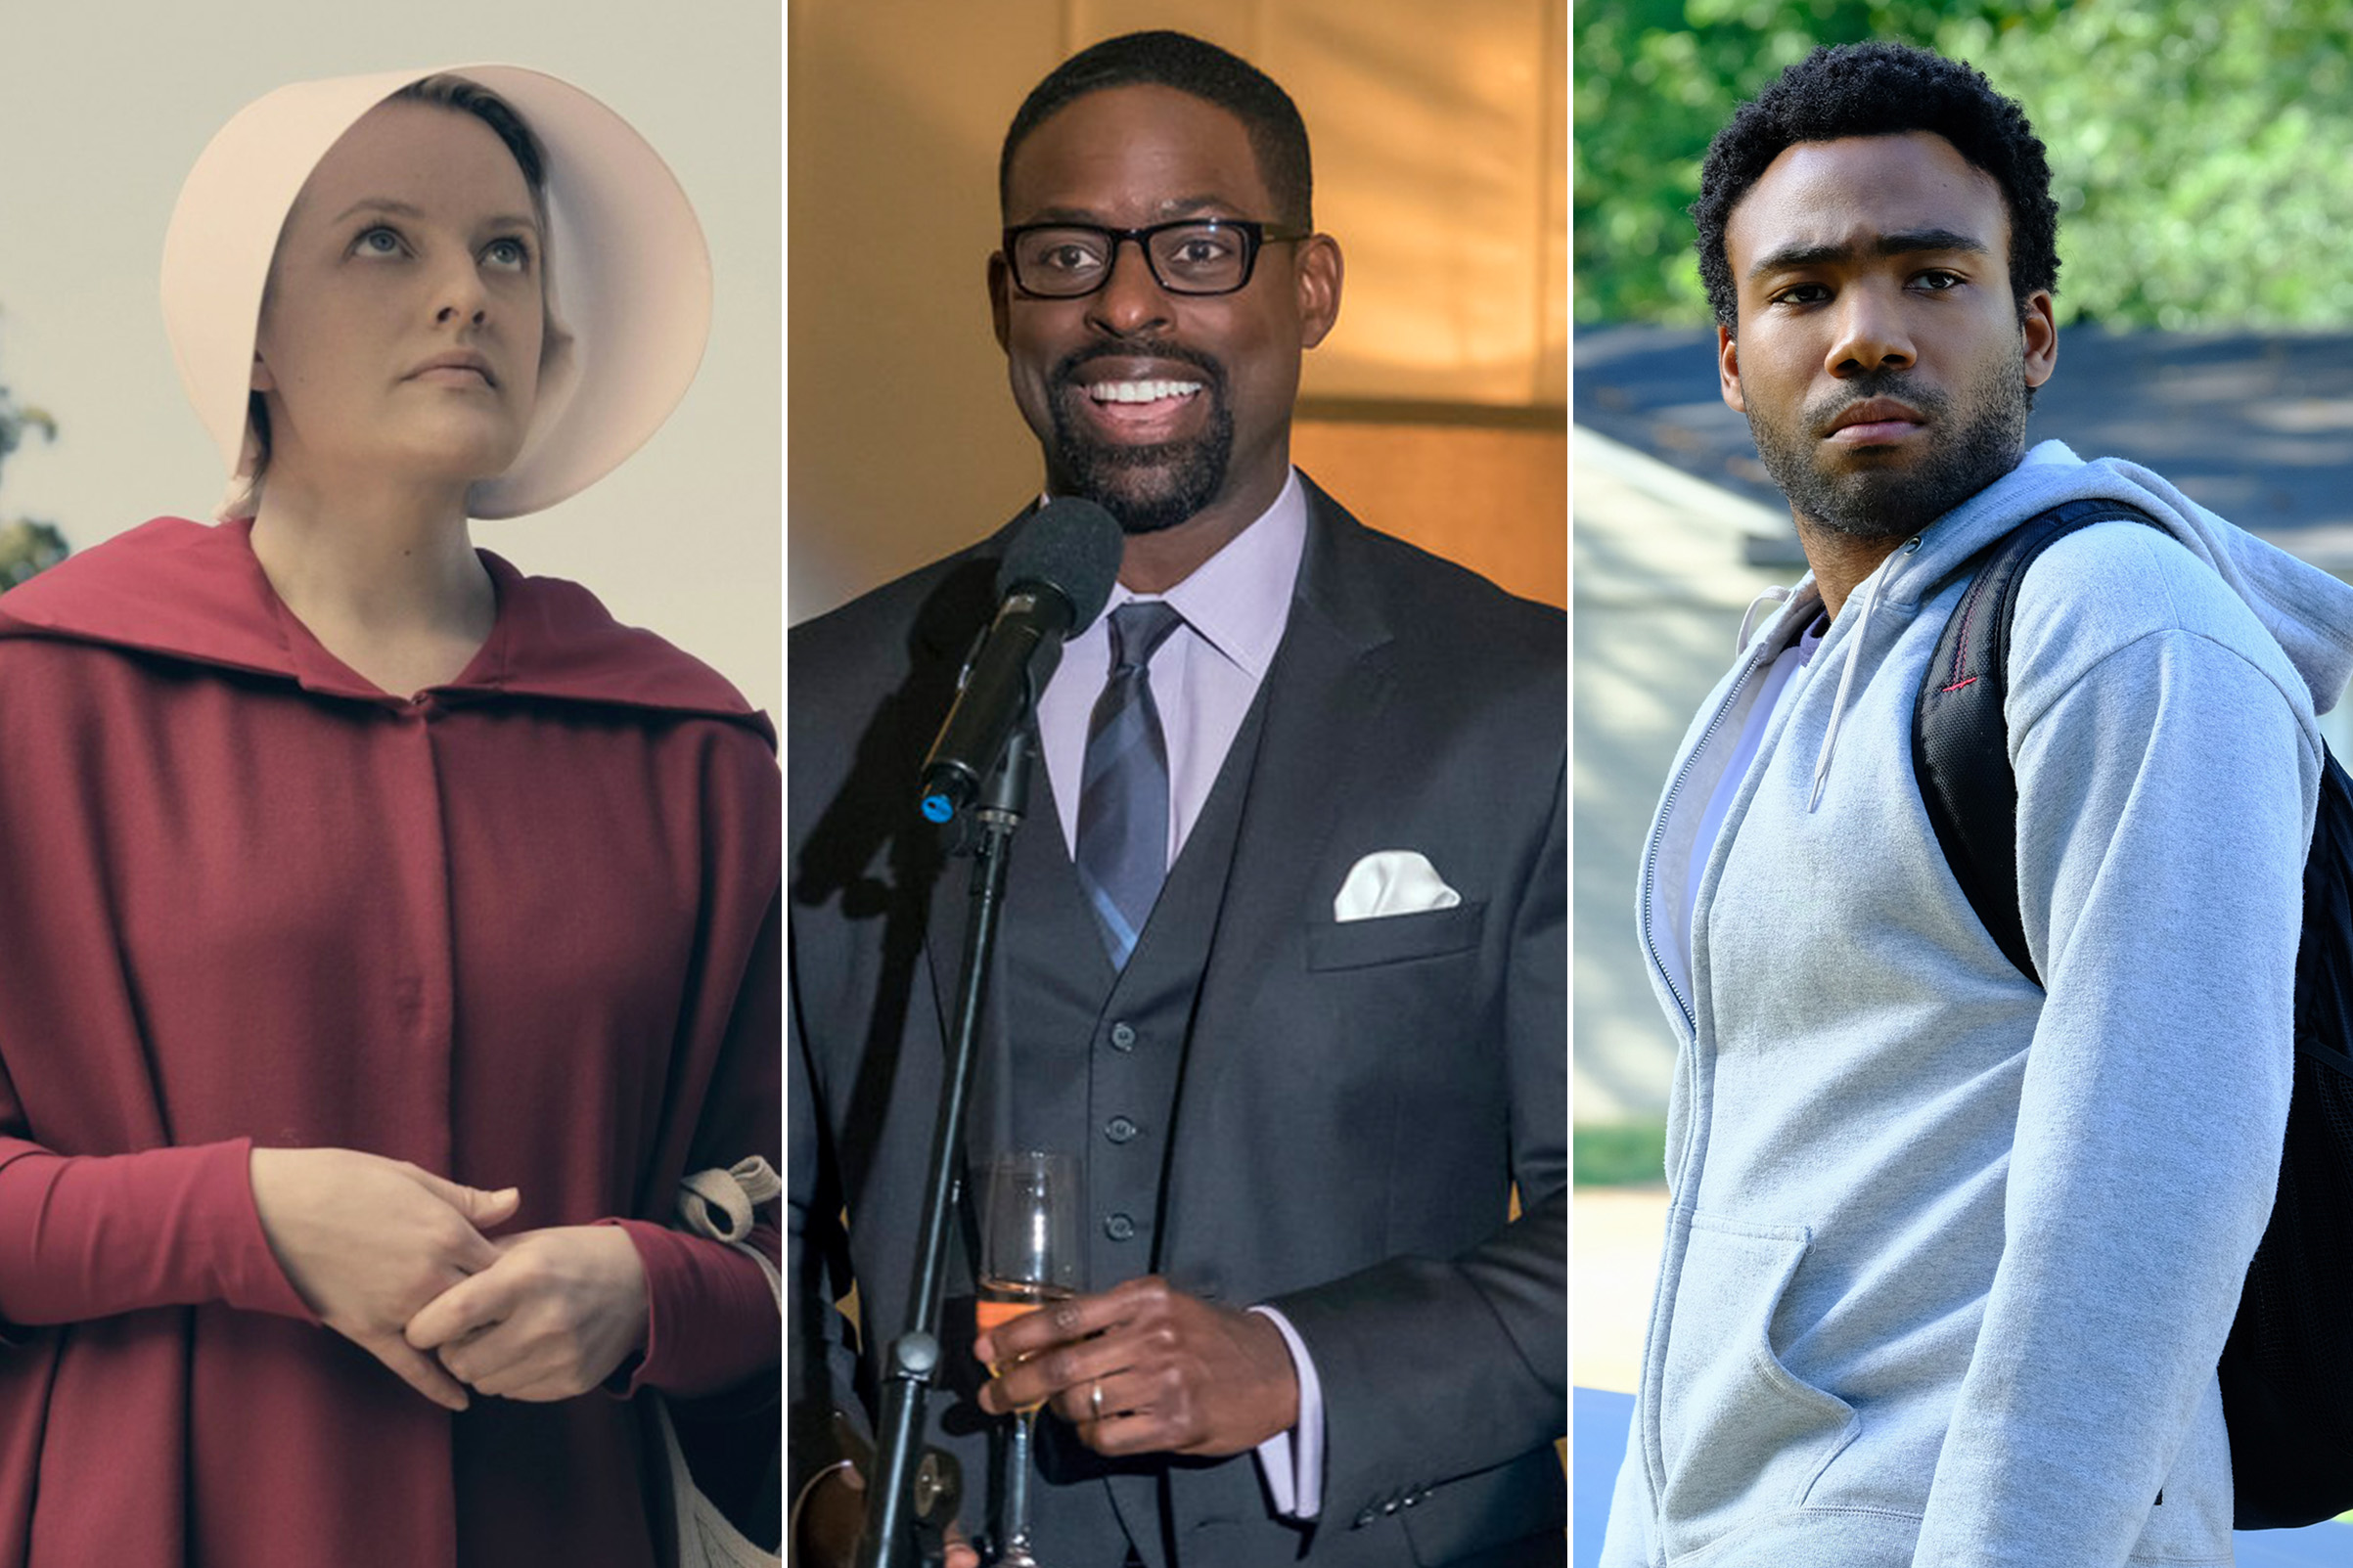 Elisabeth Moss in 'The Handmaid's Tale'; Sterling K. Brown in 'This is Us'; Donald Glover in 'Atlanta' (George Kraychyk—Hulu; Ron Batzdorff—NBC; Guy D'Alema—FX)